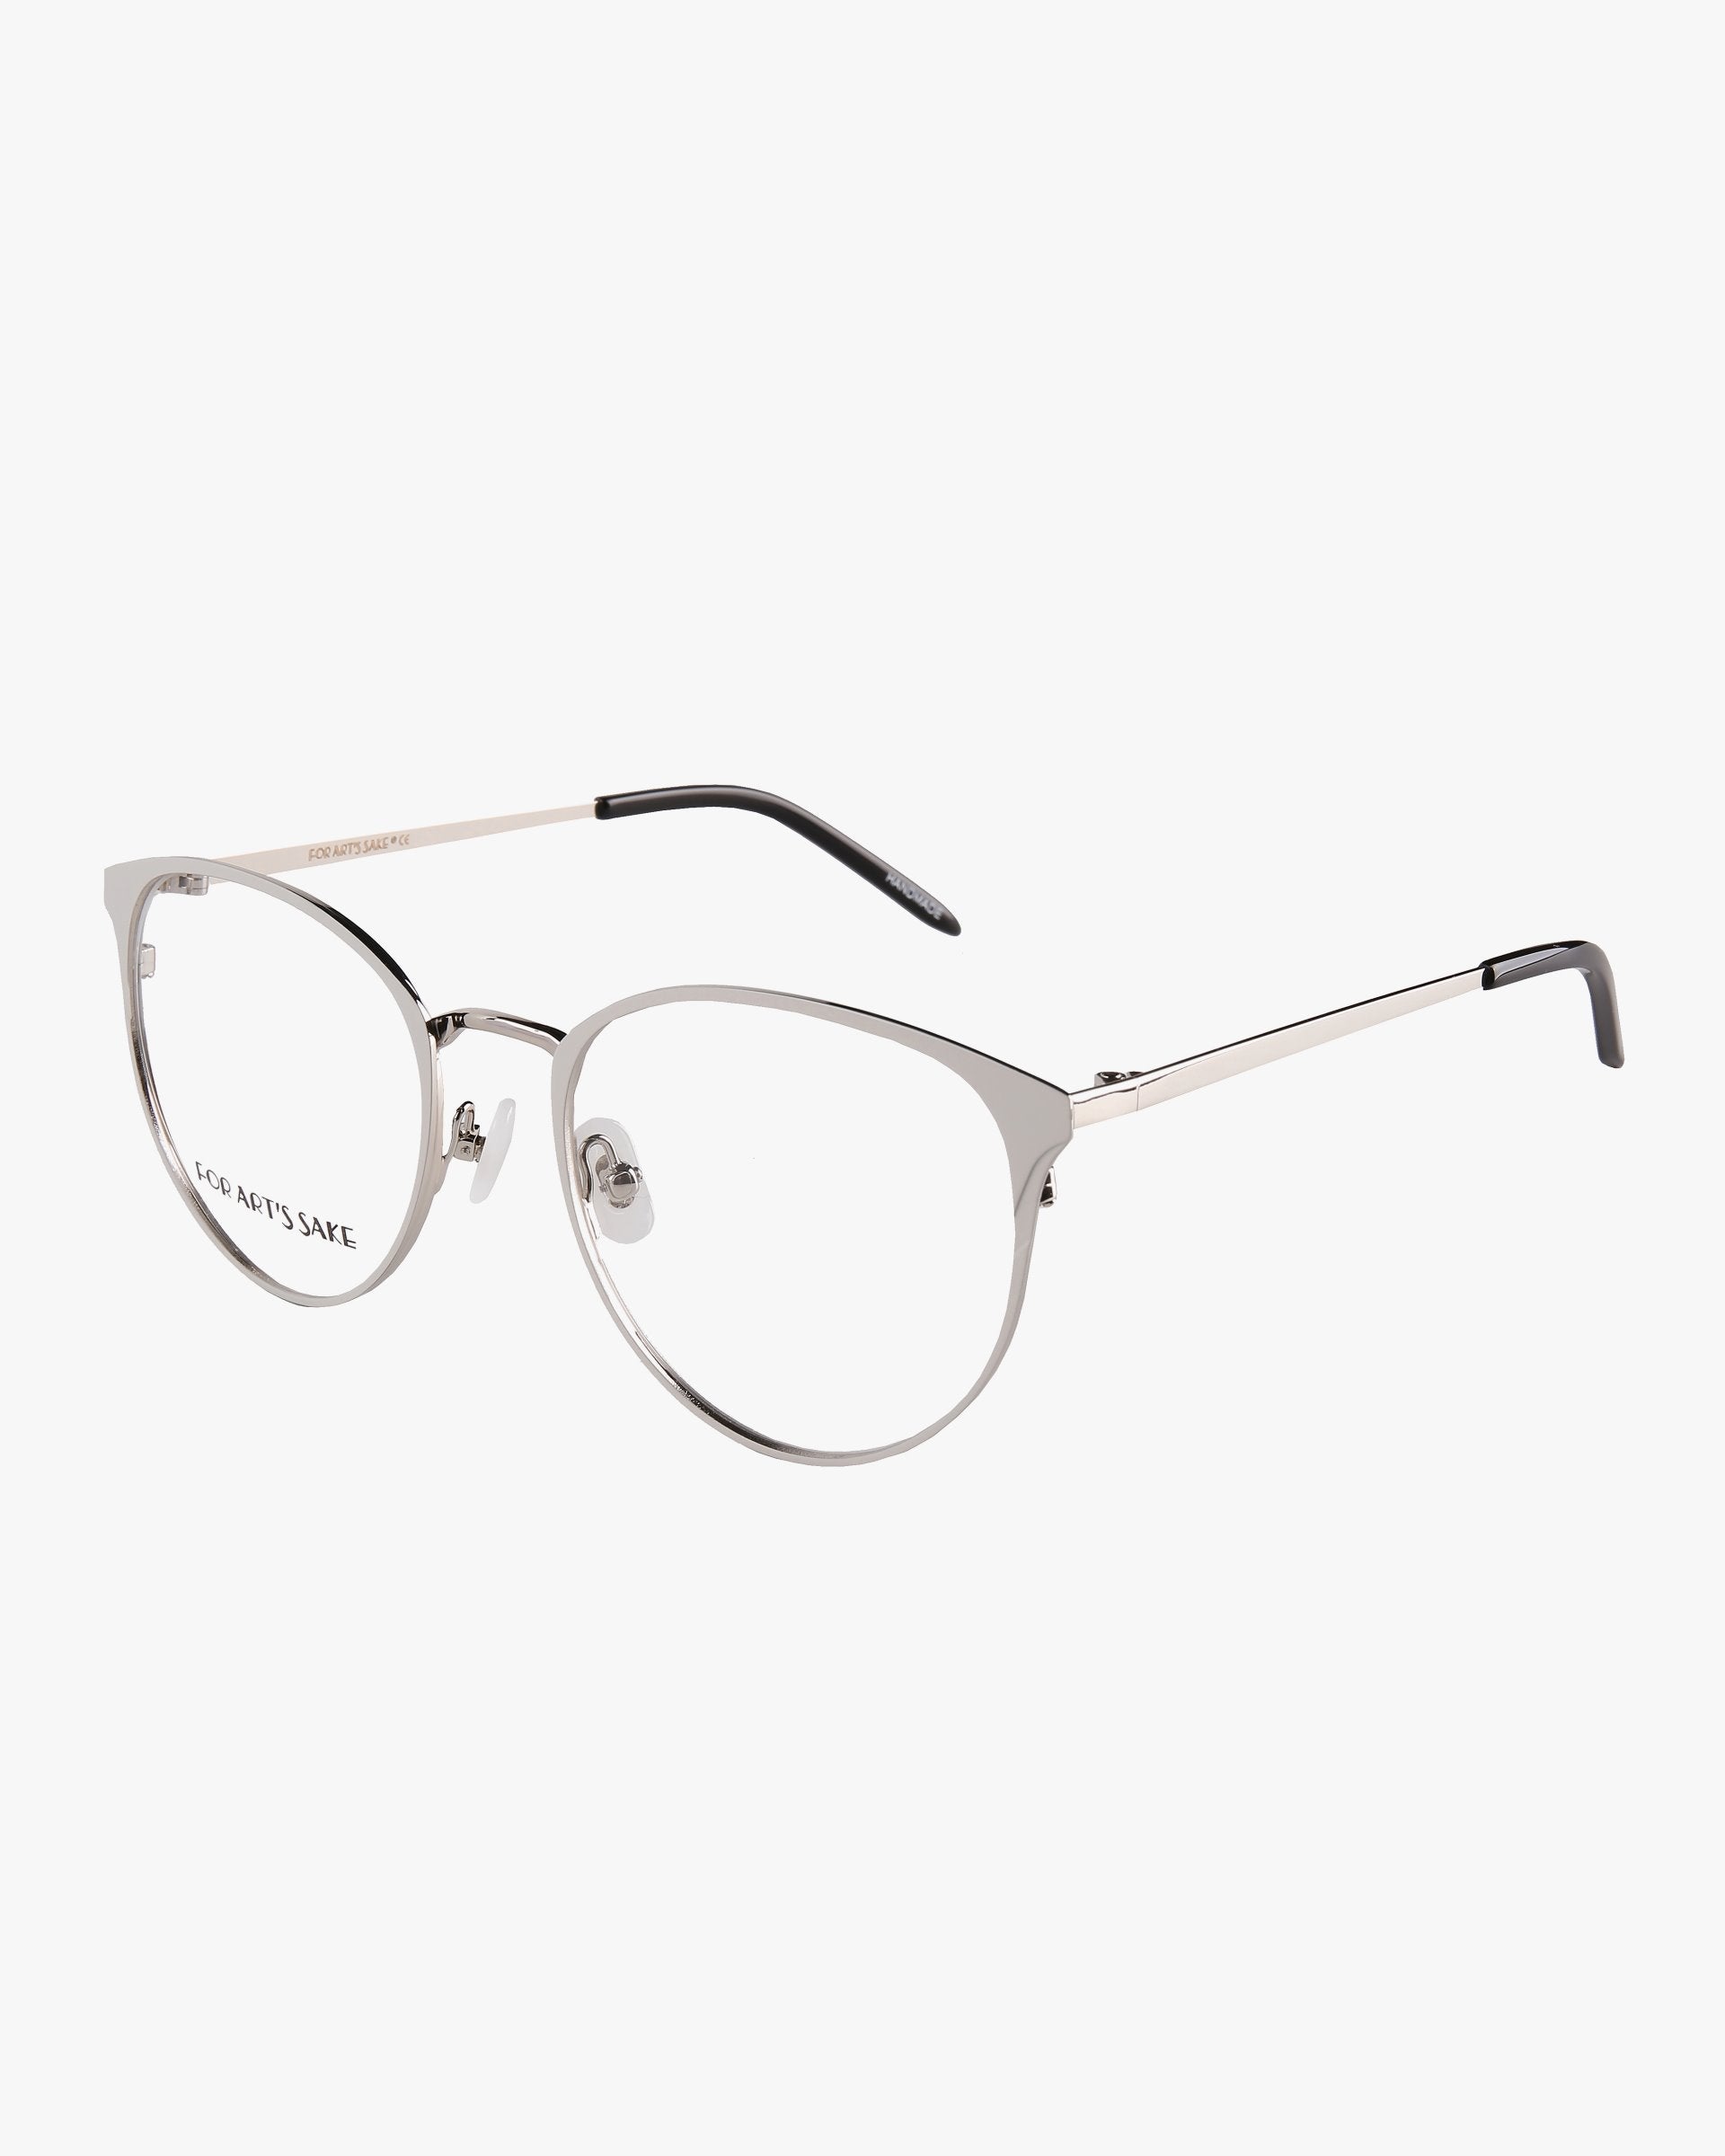 A pair of sleek, modern For Art&#39;s Sake® Olivia Grey eyeglasses with thin, metallic silver frames and clear lenses. The temples are straight with black ends, adding a contrasting detail to the design. Featuring a slight cat-eye shape with a minimalist aesthetic, these opticals on sale include an optional prescription service for added convenience.